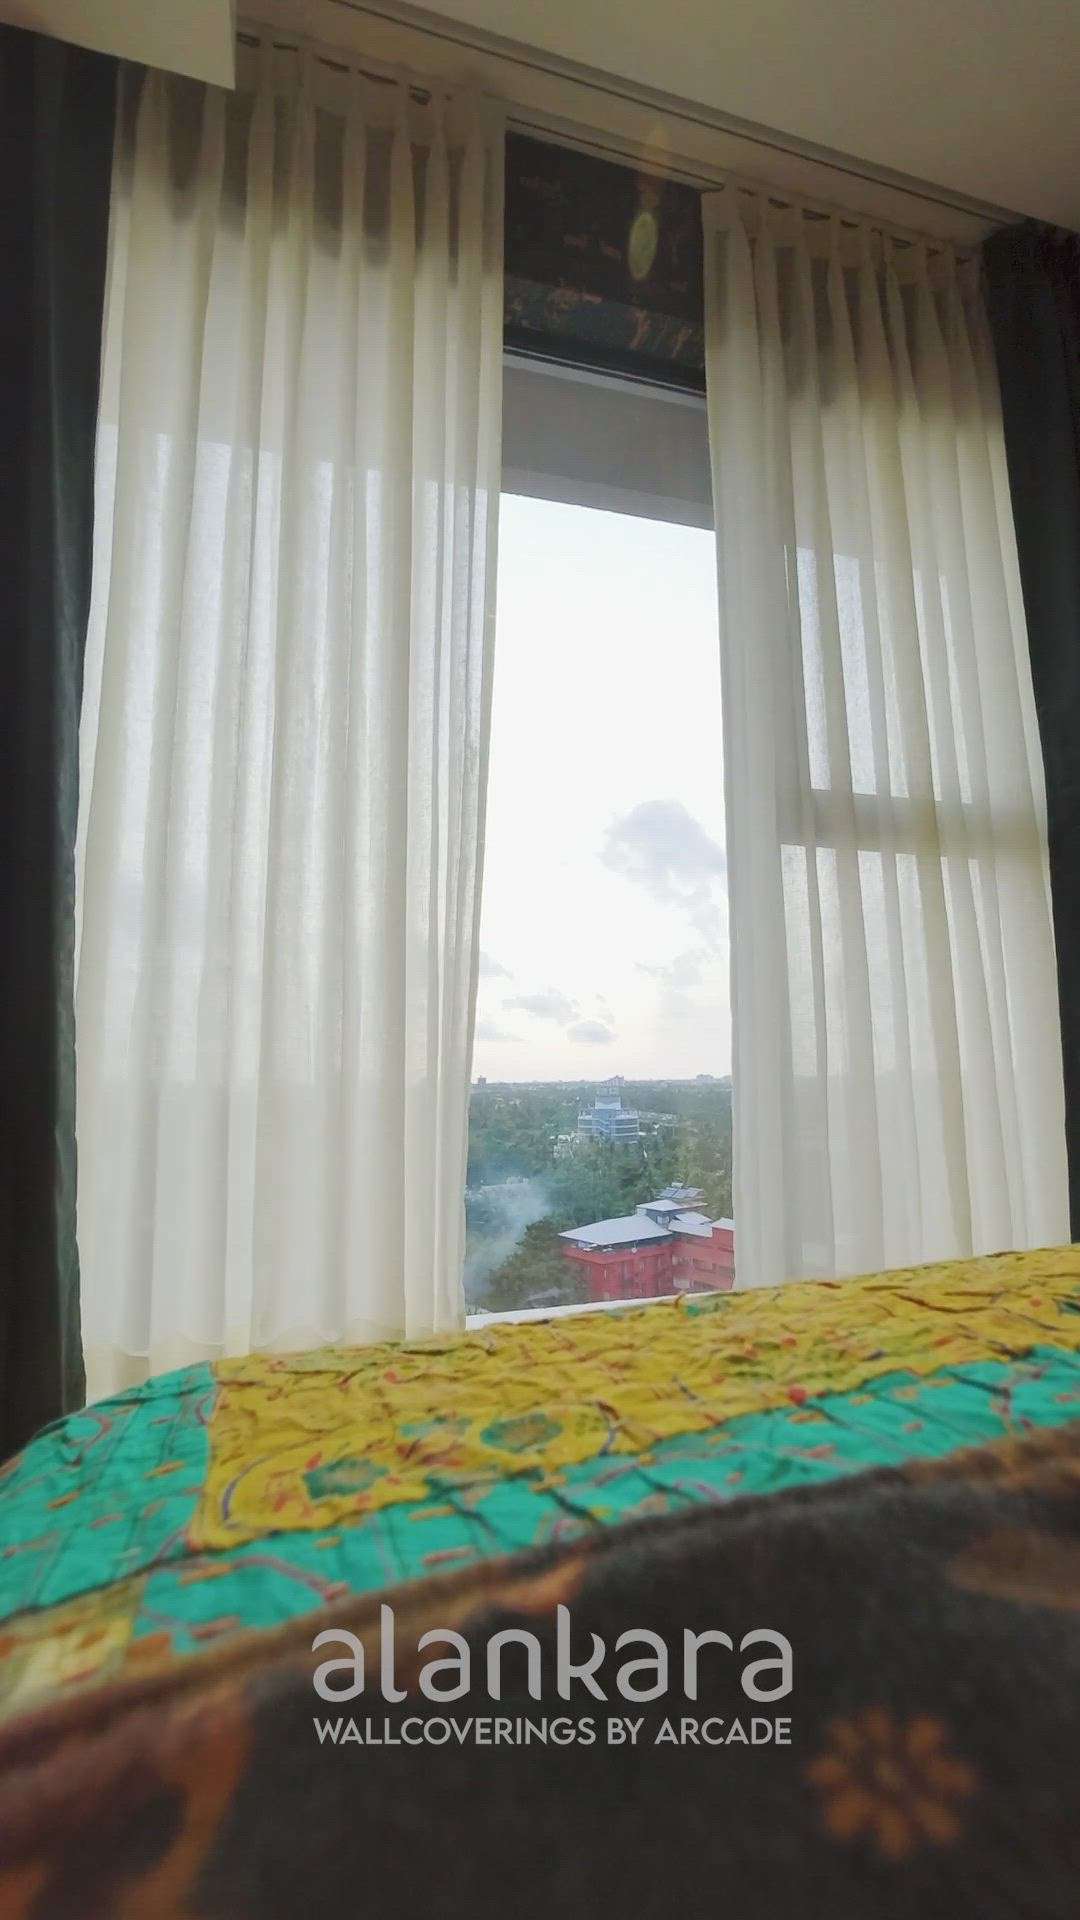 Enjoying the view from the comfort corner of your room is just a click away! Automated curtains for the rescue. Opening and closing curtains with a remote control, what could be more sassier!!


Wonderful Walls. Wonderful Homes. Alankara Promise

ᴅo ᴠisit ᴏur ꜱhowroom at
Cochin
Alankara Wallcovering
Near Pulinchod Metro Station, Metro Pillar No 76, Aluva, Kochin,Kerala 683101
Ph: 8089181314,
9995340439
*
*
*
Do ᴠisit ᴏur ꜱhowroom at
Bengalore
Alankara Wallcovering
8/9 First Floor, Oppo Mahaveer Ranches, Hosa Road, Bengalore 560100
Ph: 8129773421,
9995340439